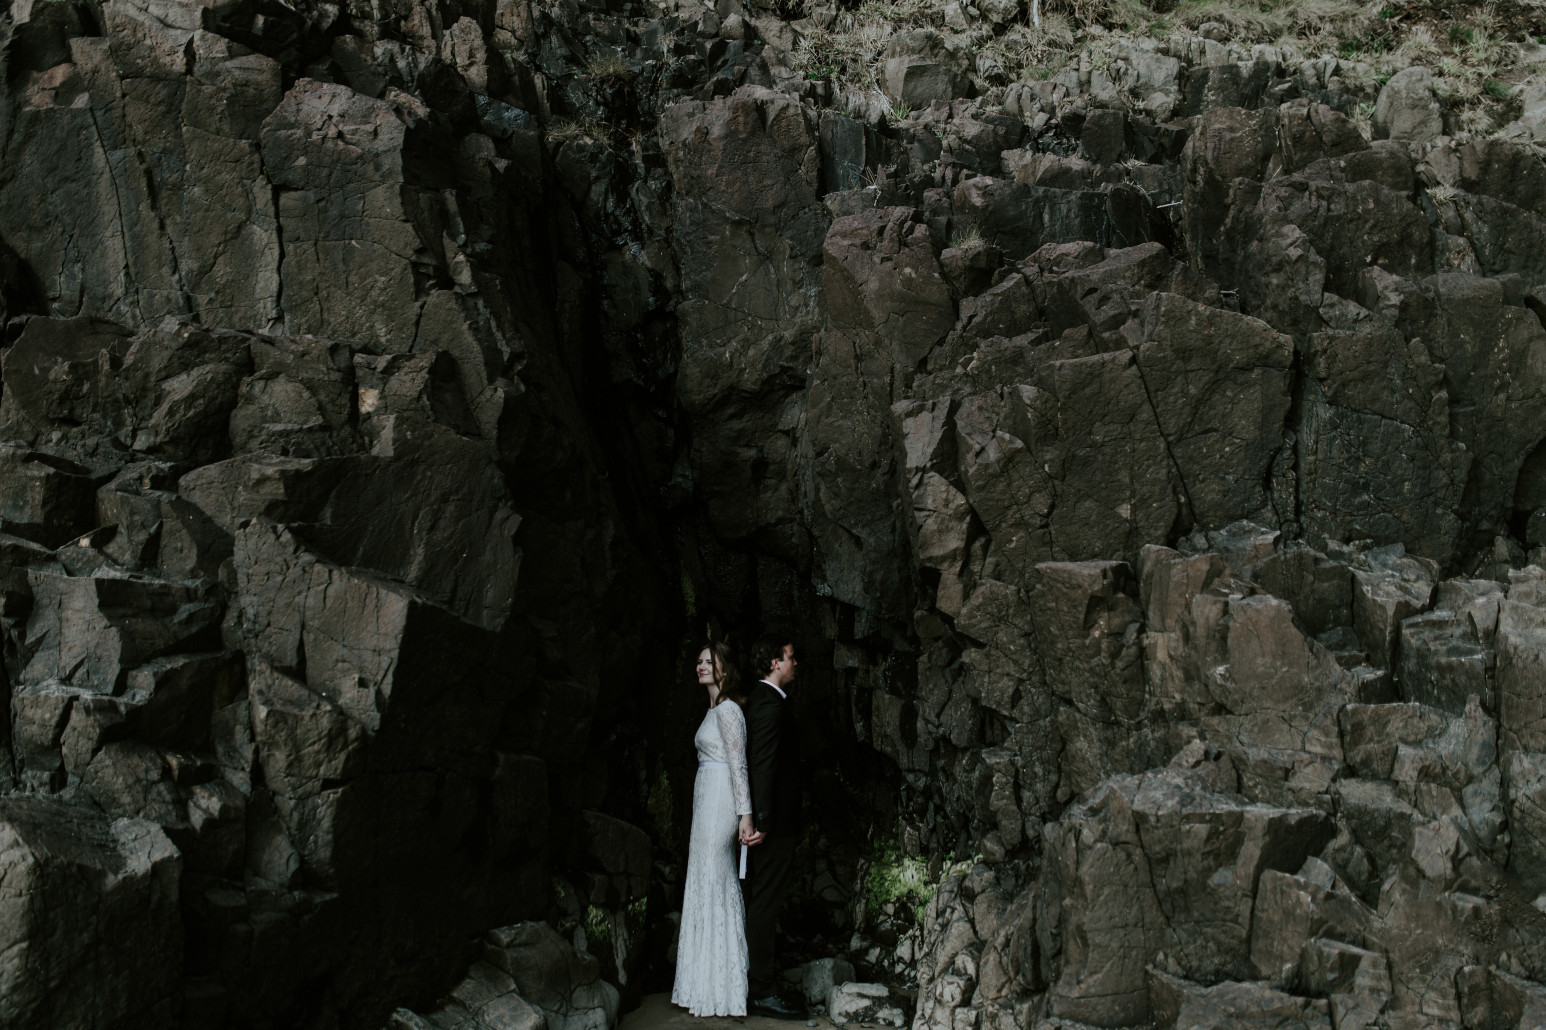 Nicole and Vlad . Elopement wedding photography at Cannon Beach by Sienna Plus Josh.